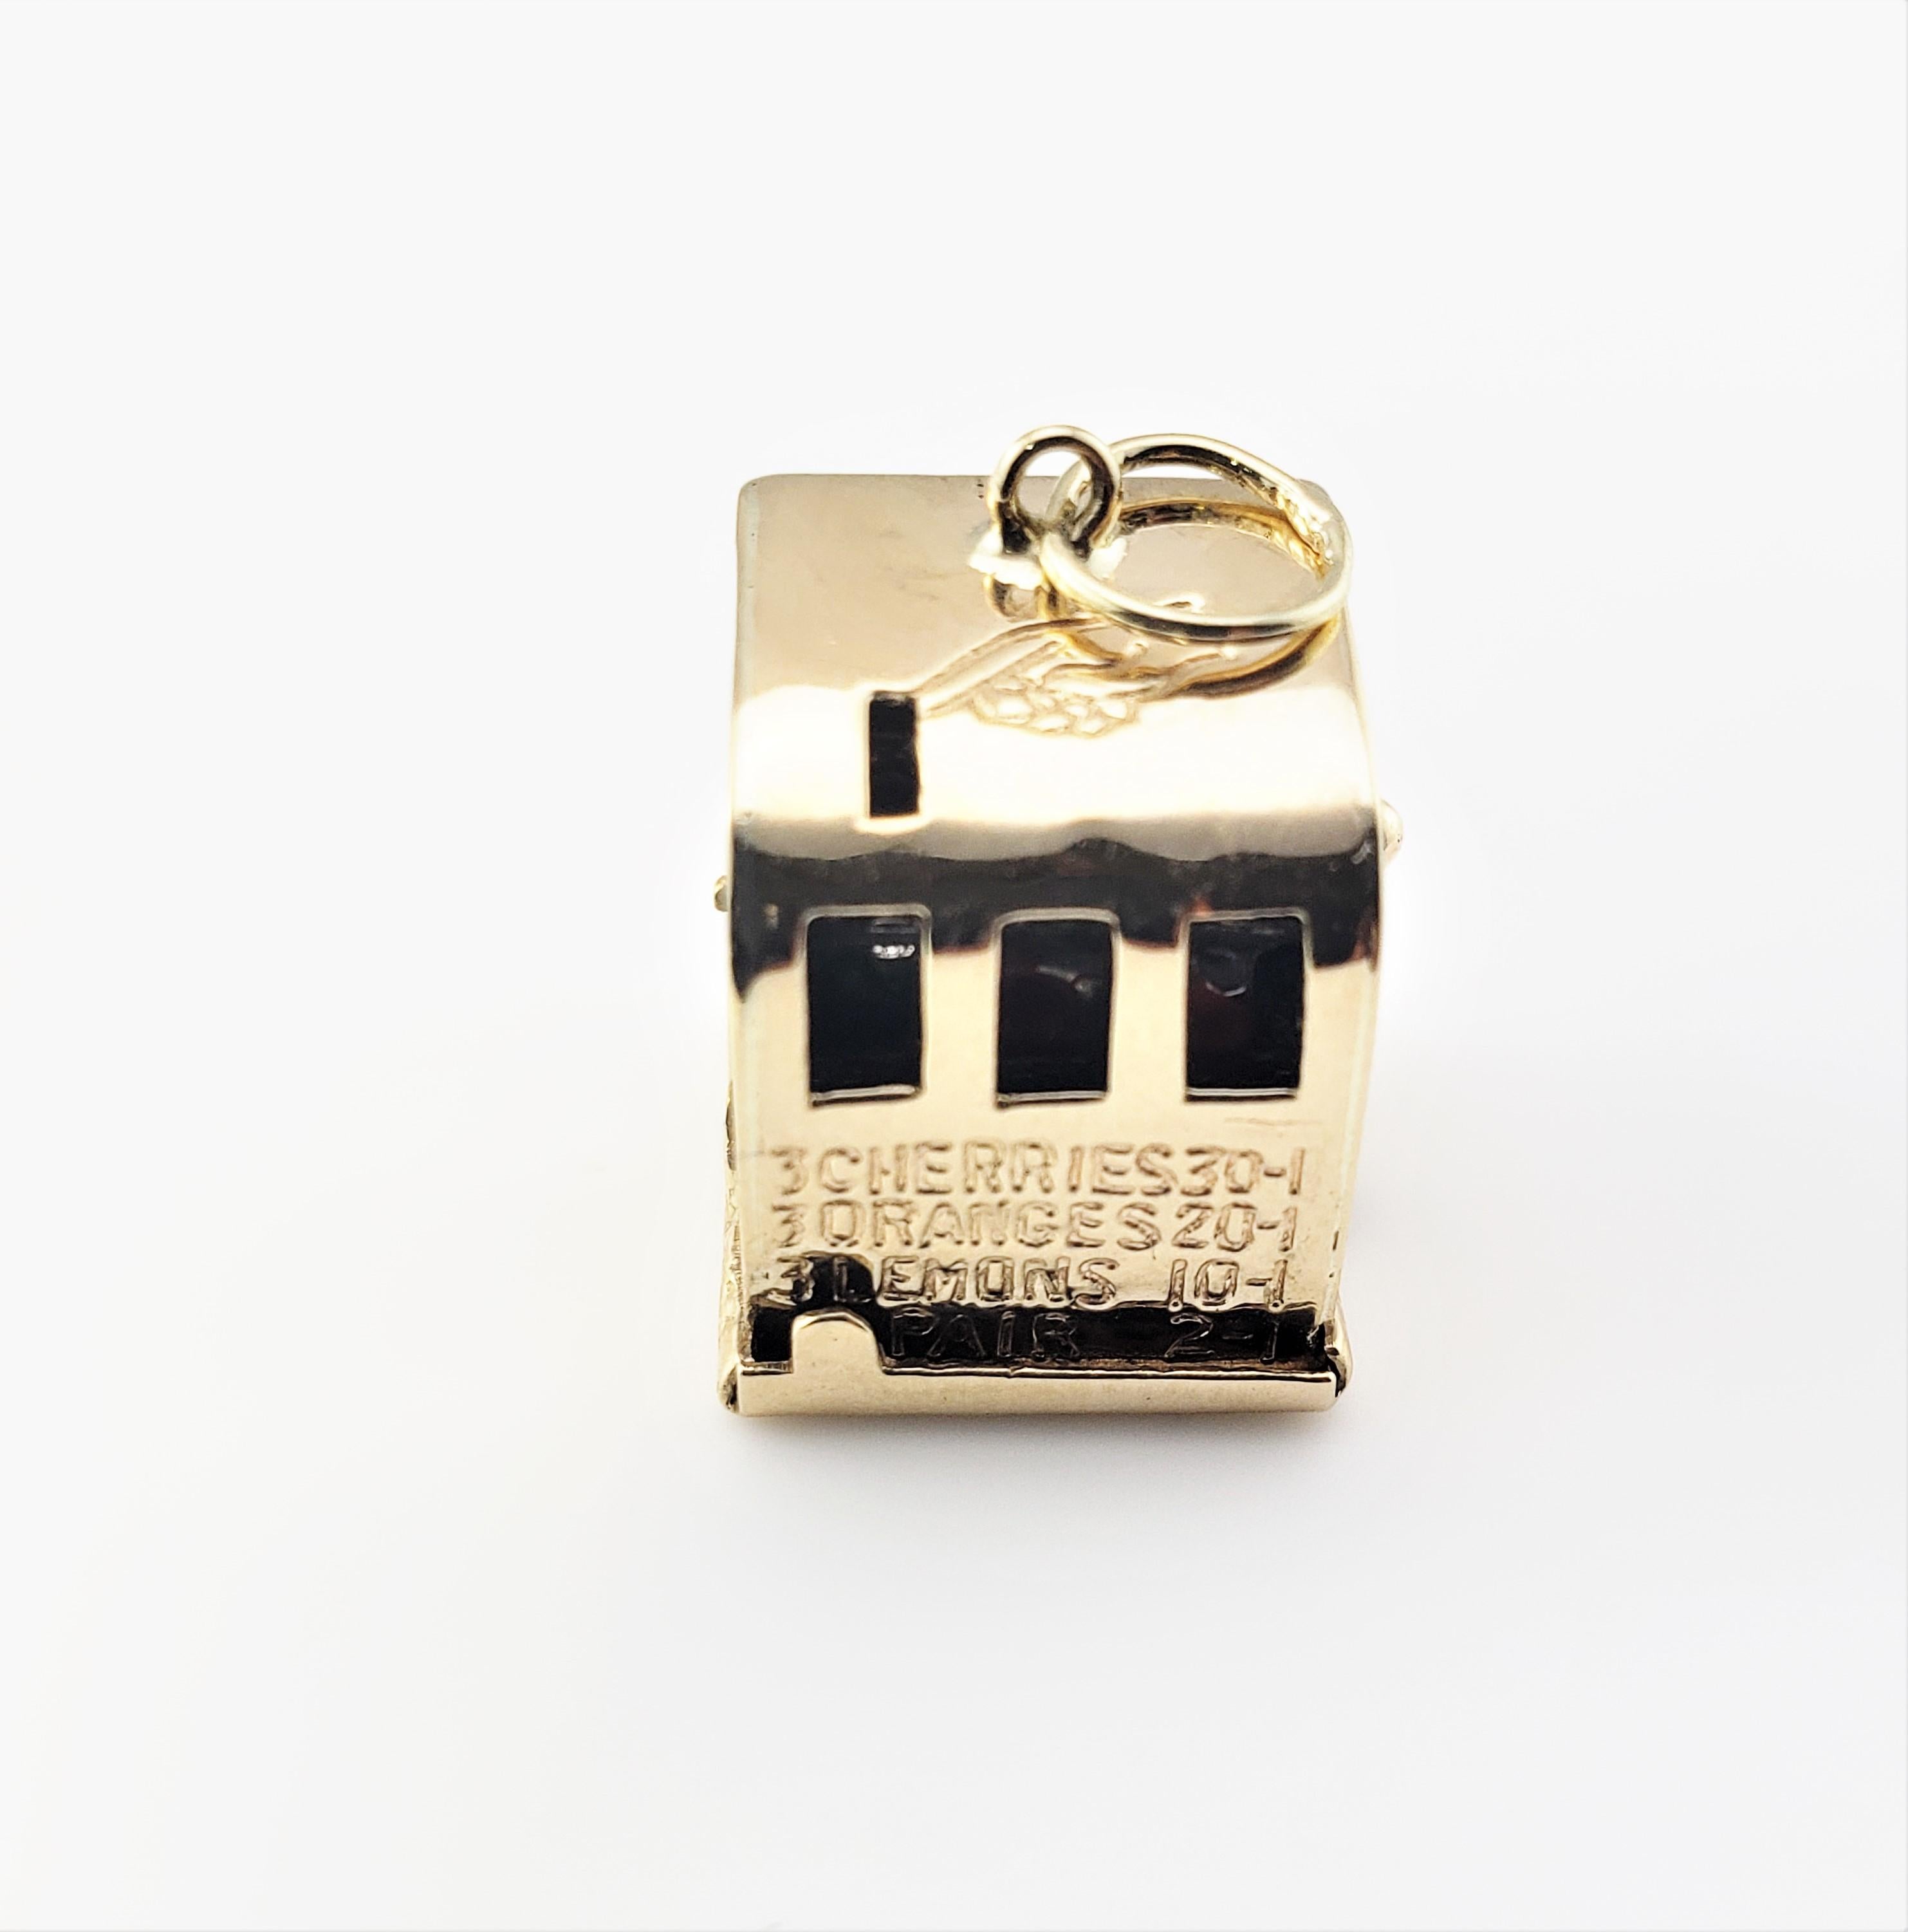 14 Karat Yellow Gold Articulated Slot Machine Charm-

Jackpot!

This lovely 3D charm features a miniature slot machine with working lever that spins that three inner wheels to reveal colored fruits.  Meticulously detailed in 14K yellow gold.

*Chain